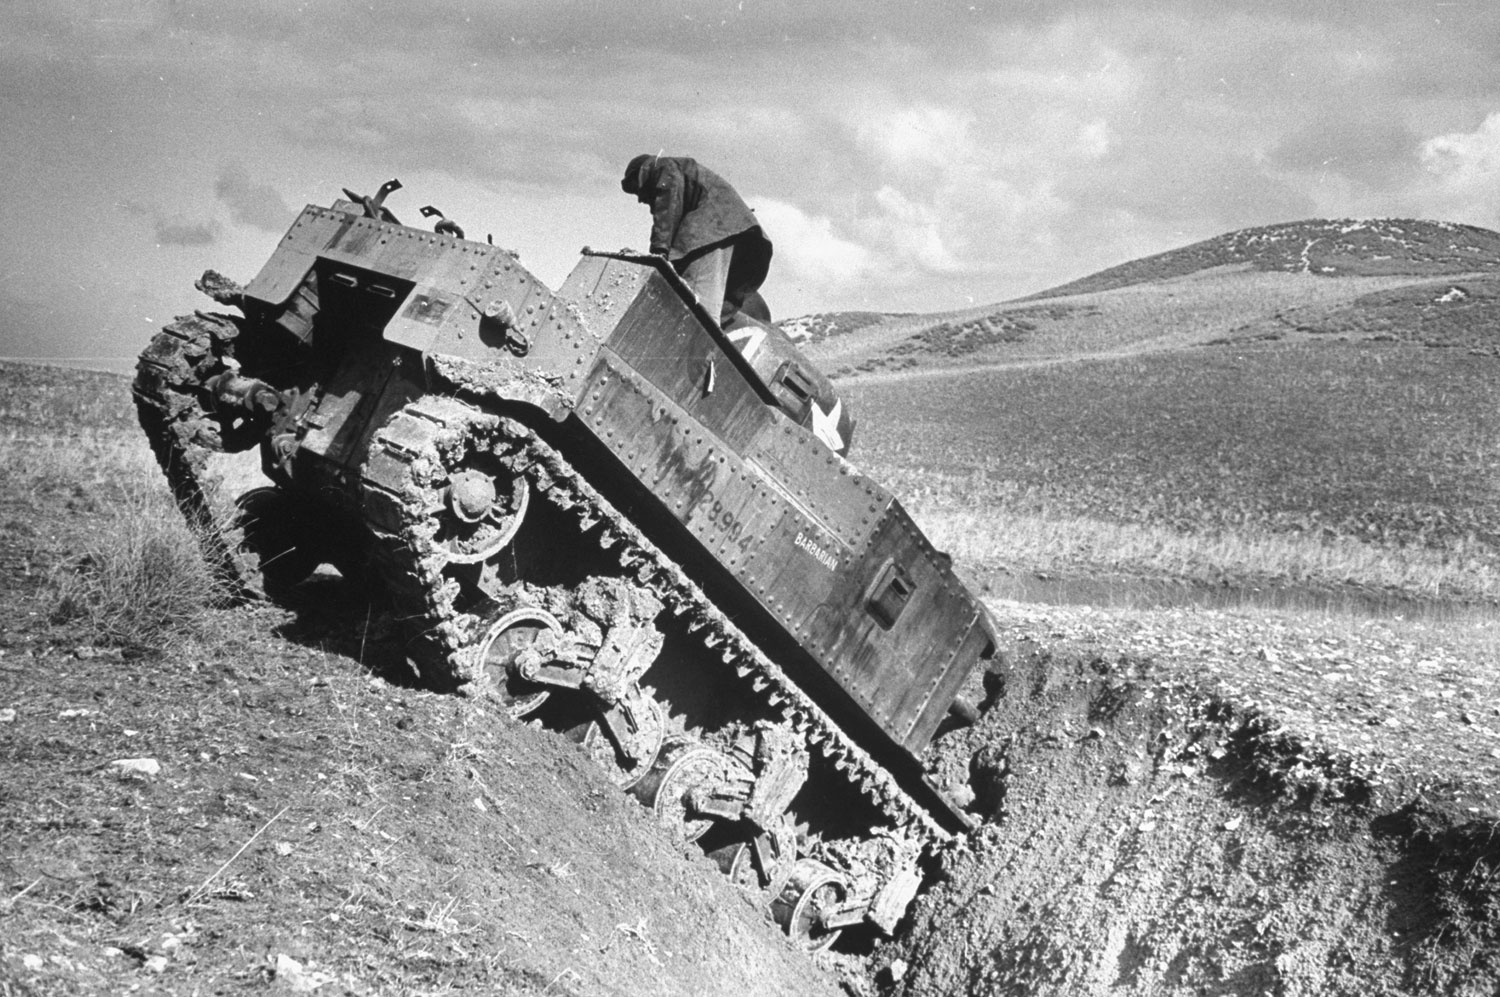 An American M3 tank disabled in Tunisia, 1943.